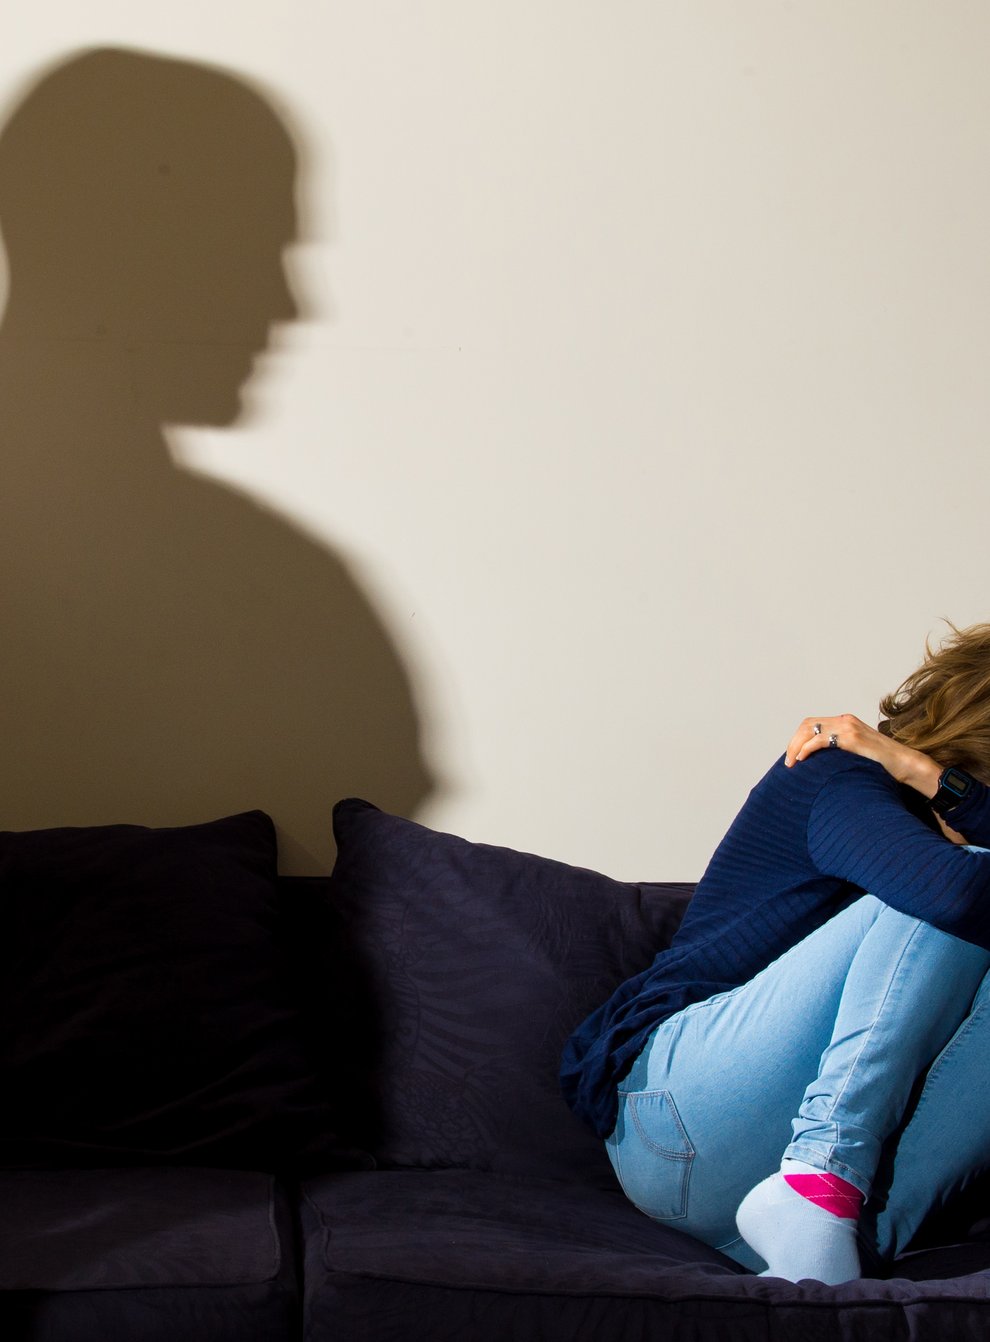 A shadow of a man looming over a woman cowering on a sofa